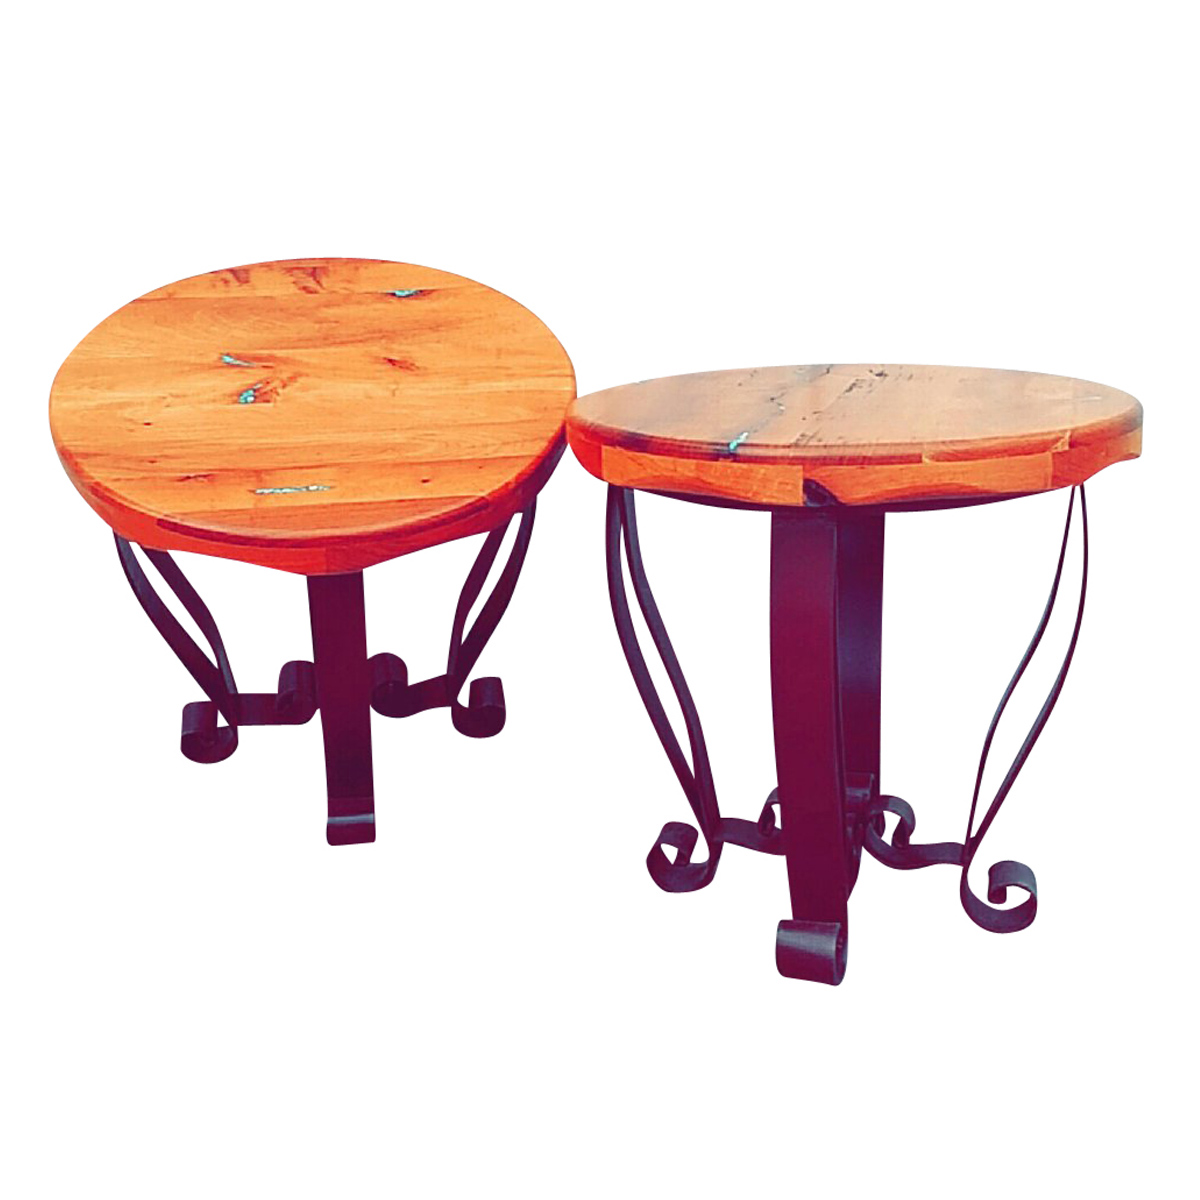 mesquite scroll end tables with turquoise inlay set wood accent table clear lucite desk tuscan hills round drop leaf kitchen mosaic tile coffee furniture wellington living room